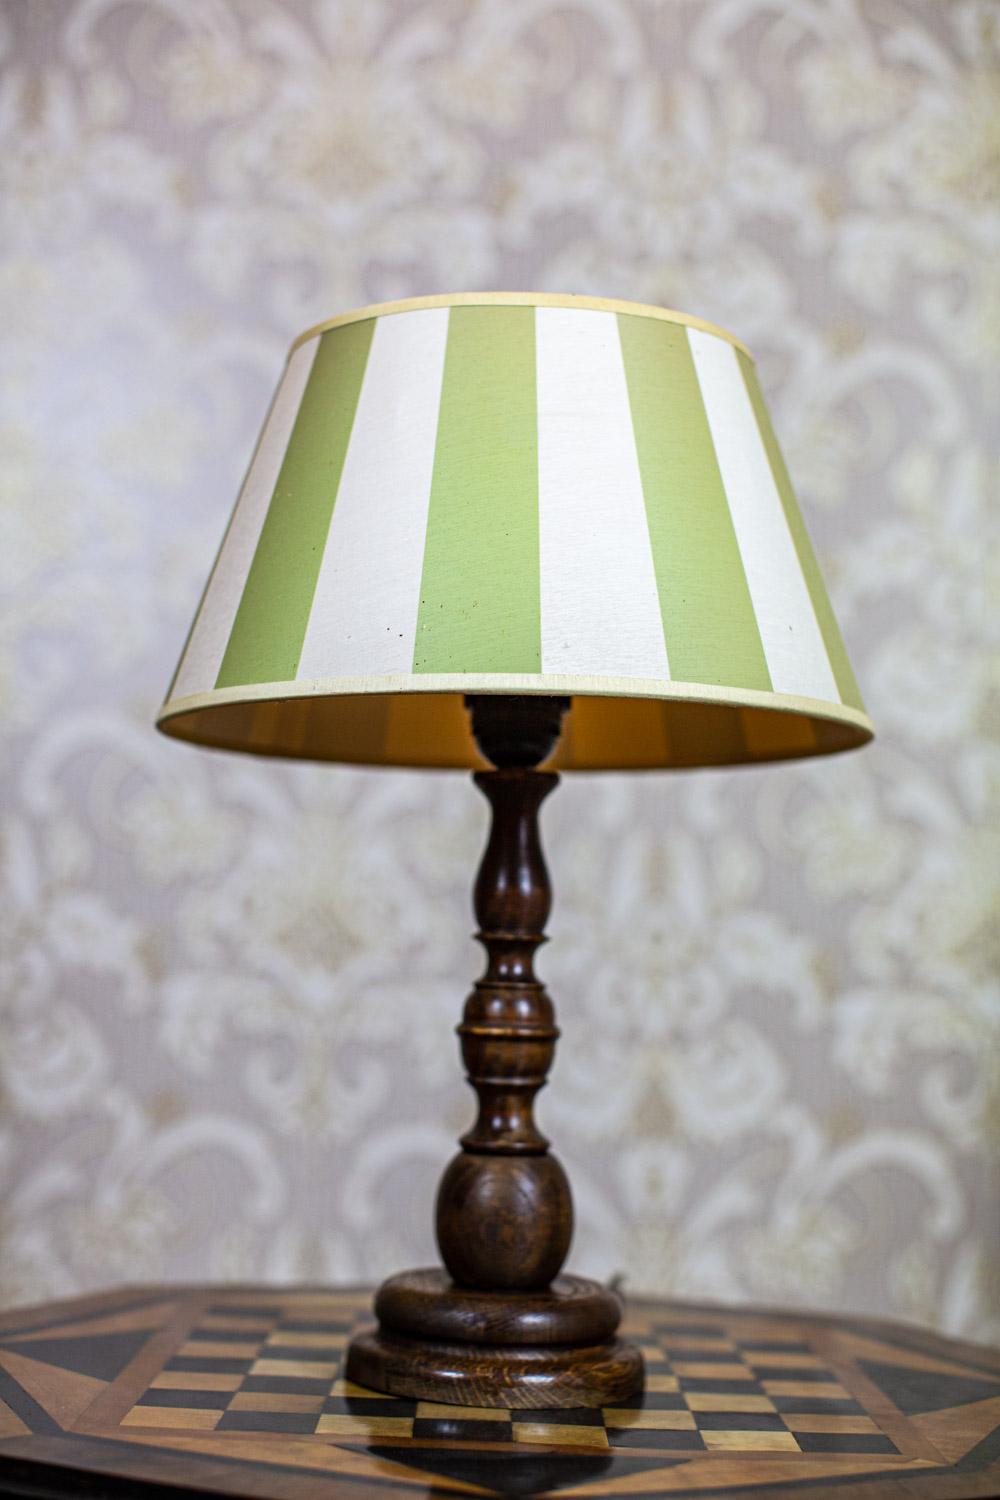 Electric Table Lamp From the Late 20th Century with Green-White Shade

We present you this electric table lamp from the 2nd half of the 20th century.
The base is wooden, whereas the cone-shaped shade is made of fabric.
The voltage is 230 V.
The lamp